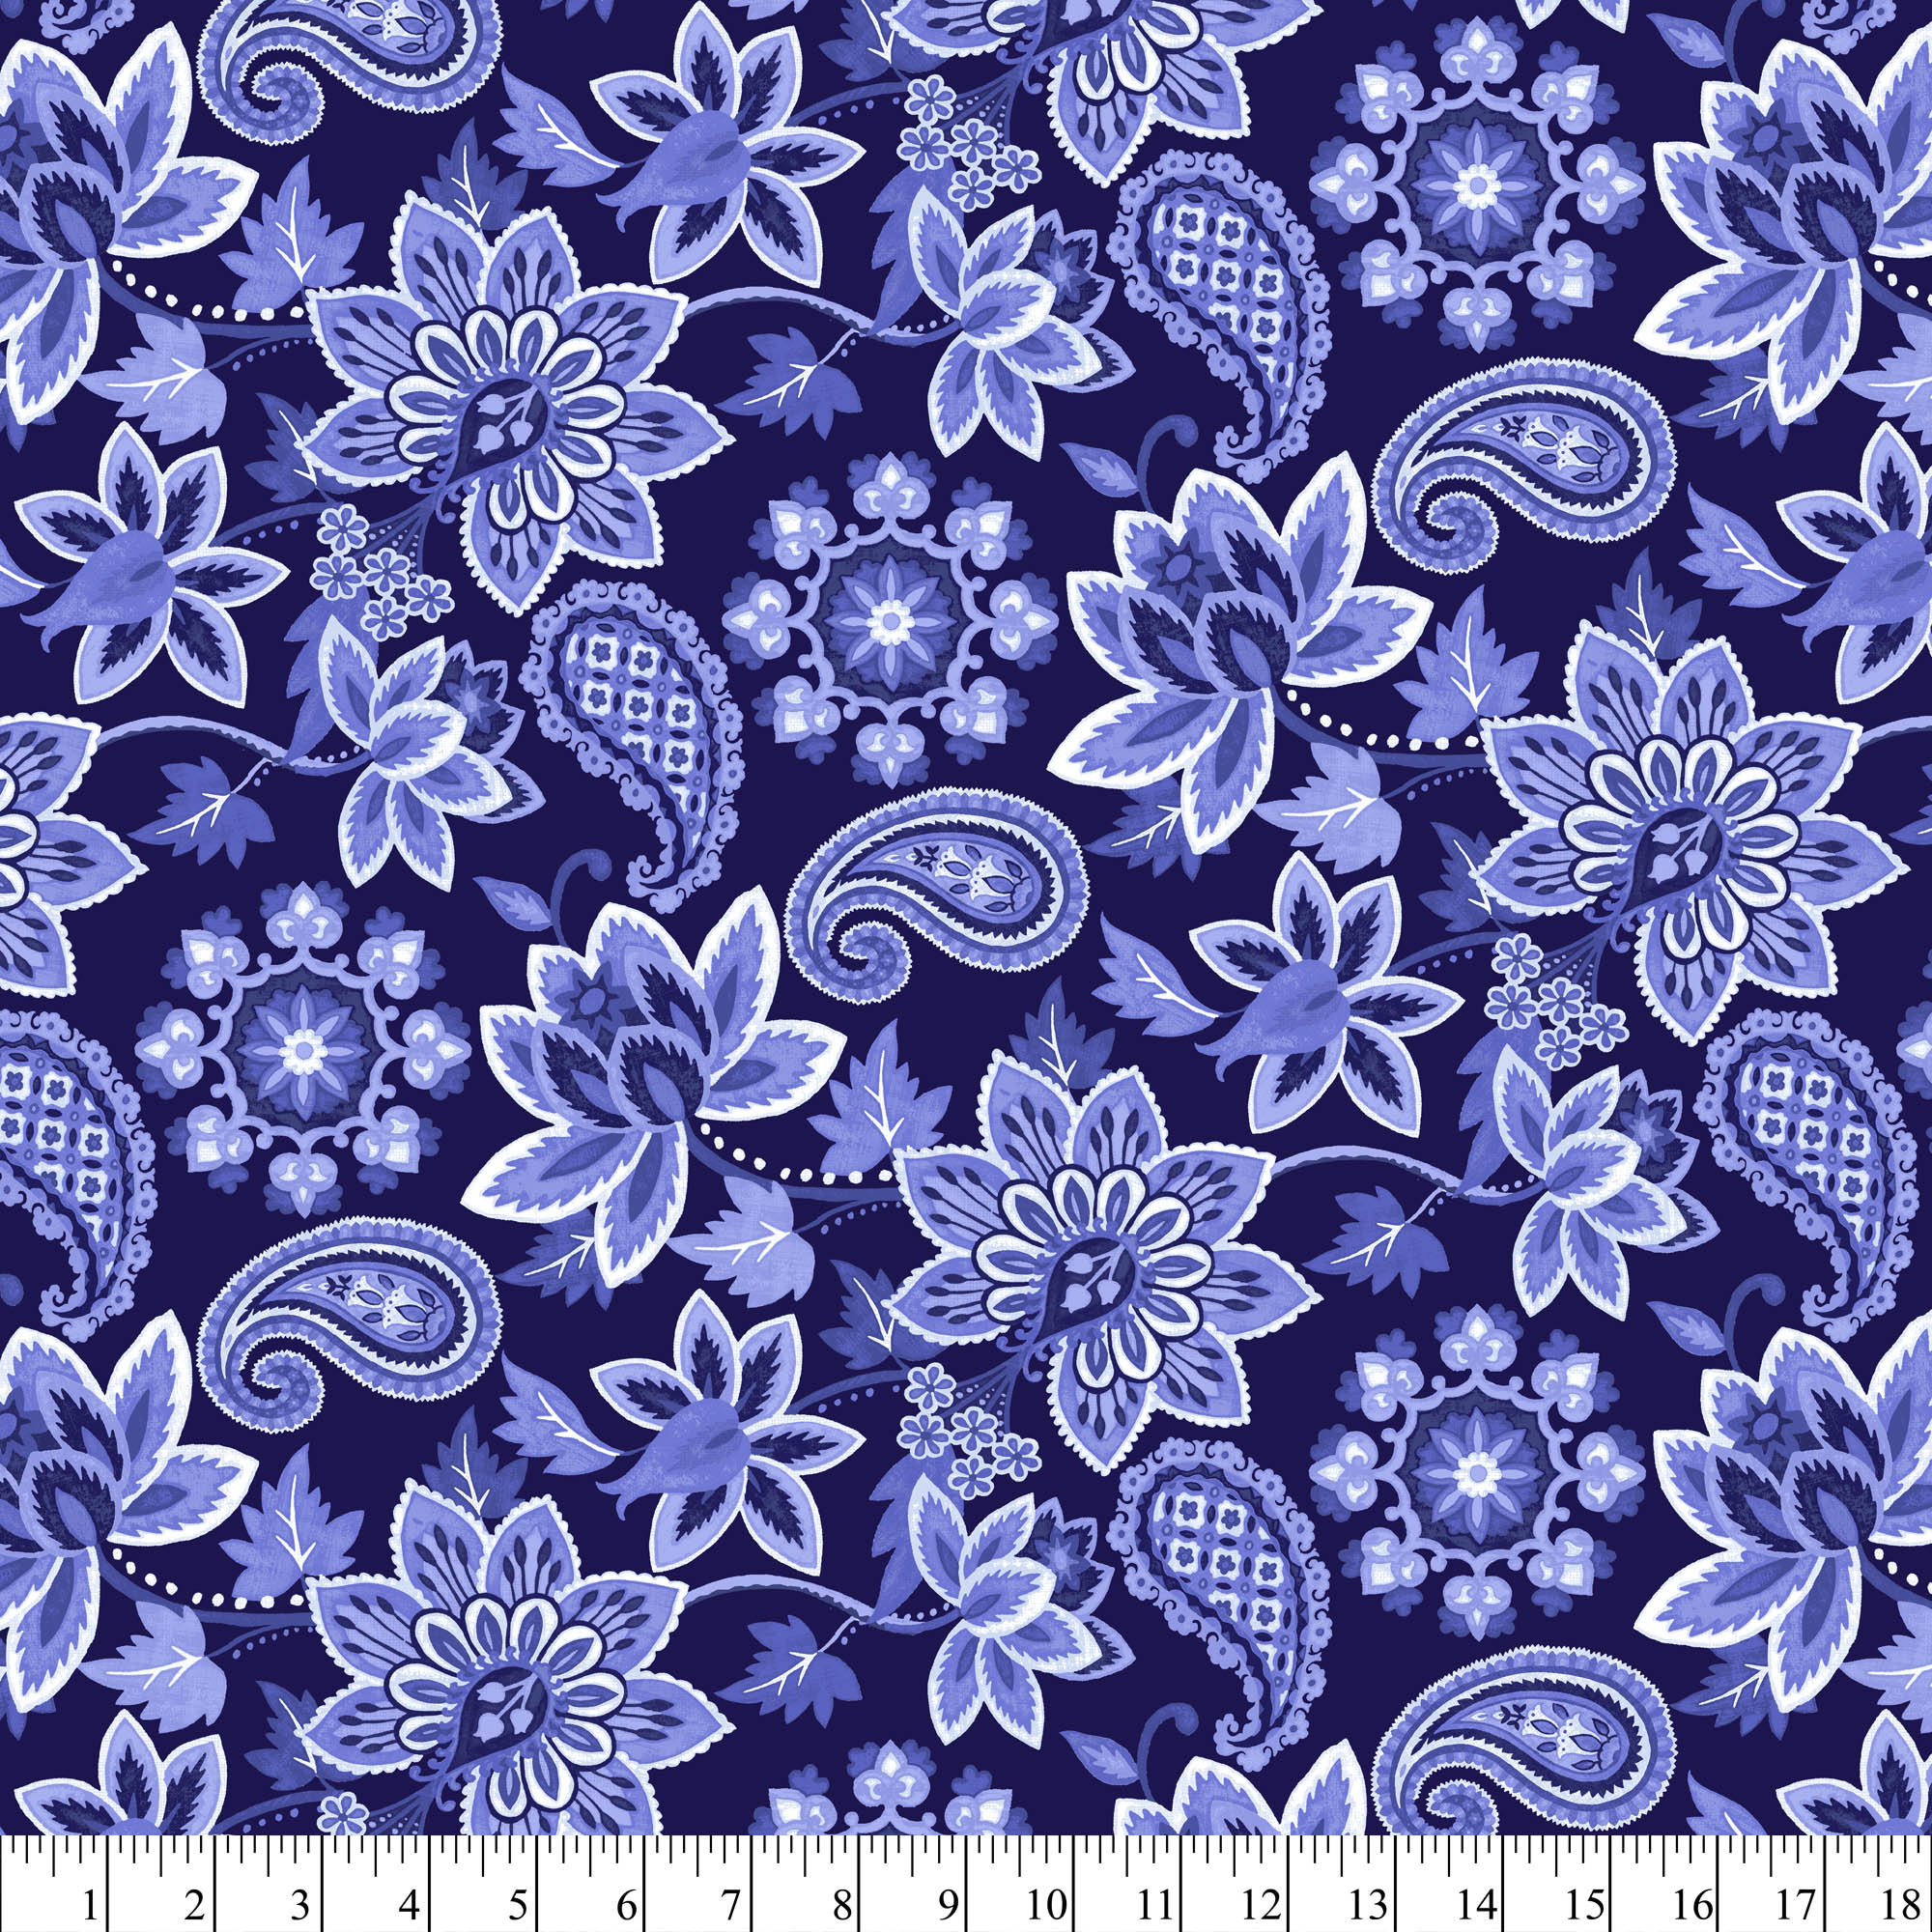 David Textiles Deco Nature Collection 44" Quilting Cotton By The Yard - image 3 of 3